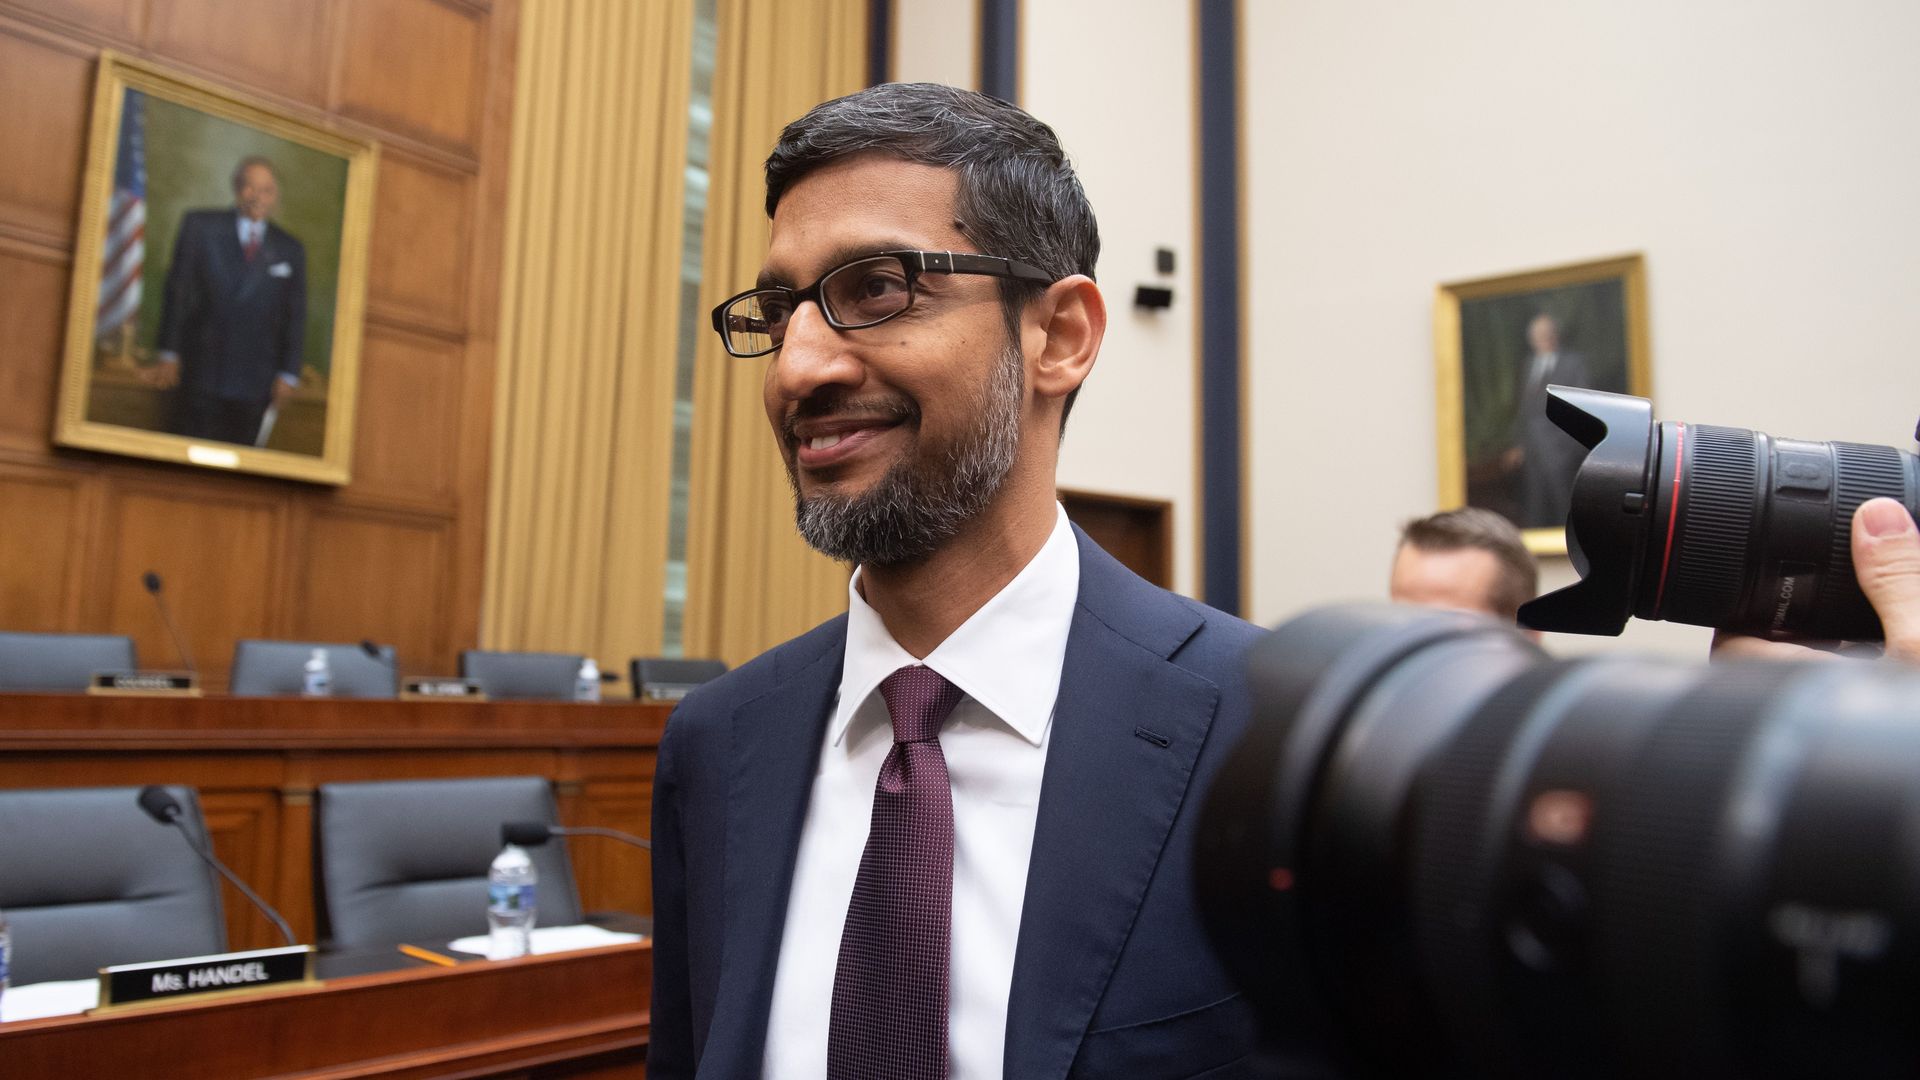 Google CEO refutes conservative claims of search bias - Axios